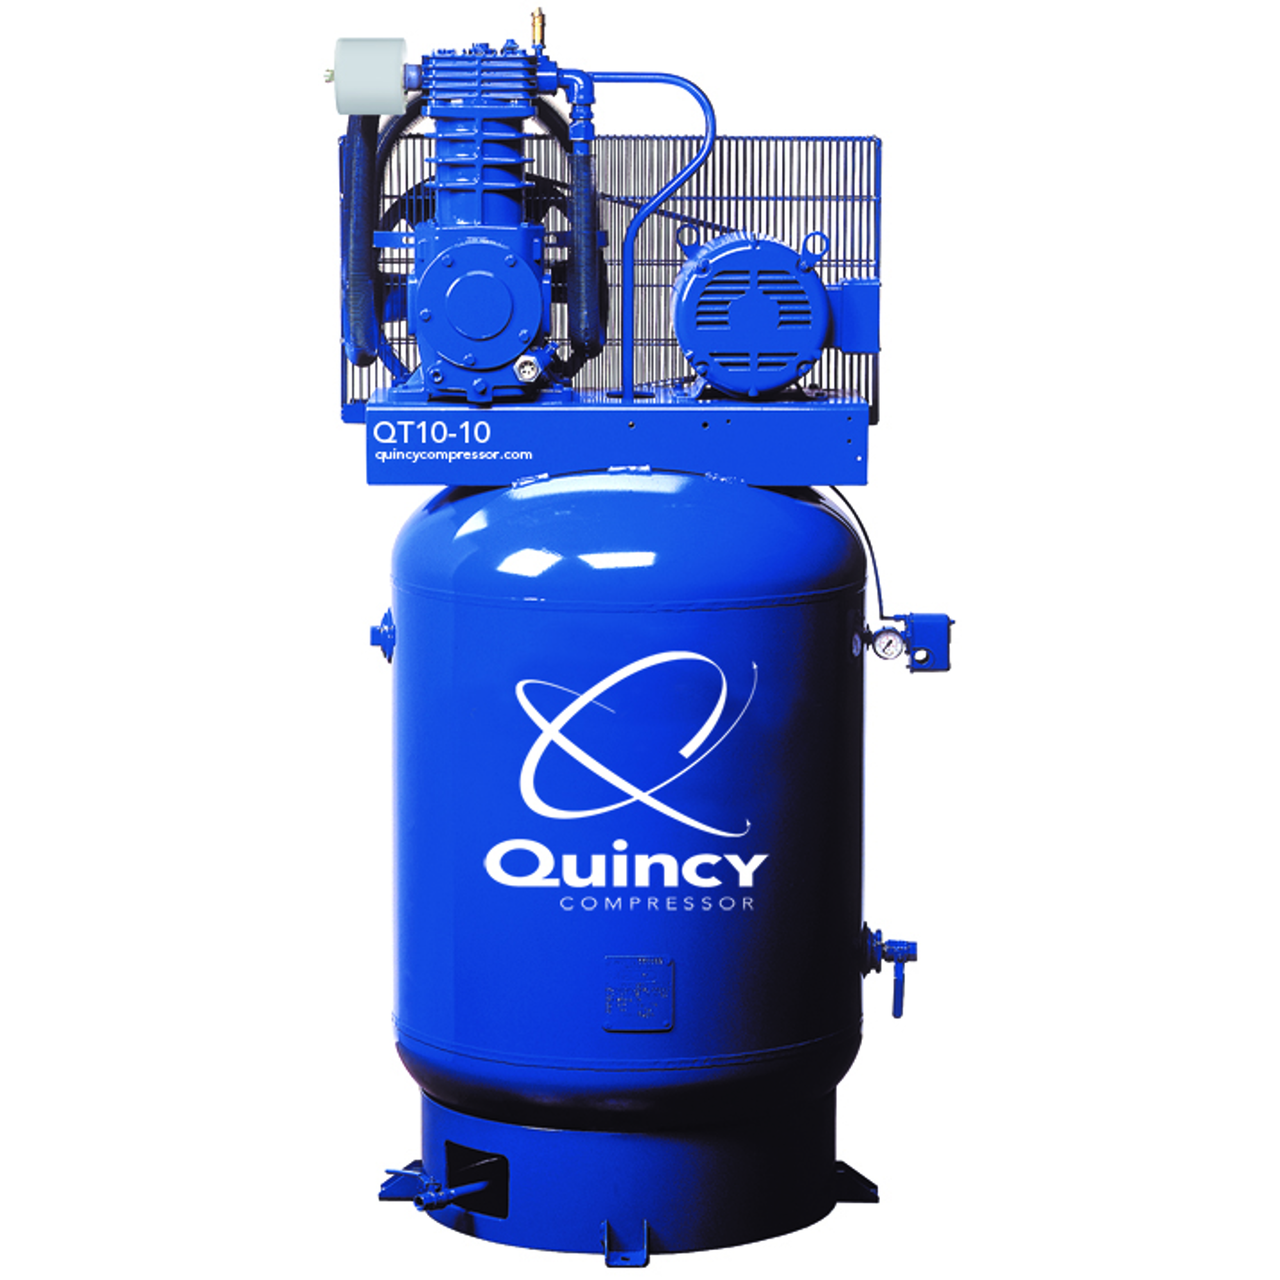 Quincy P2103DS12VCB20M 10 HP MAX, 200 Volt Three Phase, Two Stage, 120 Gallon Vertical Air Compressor